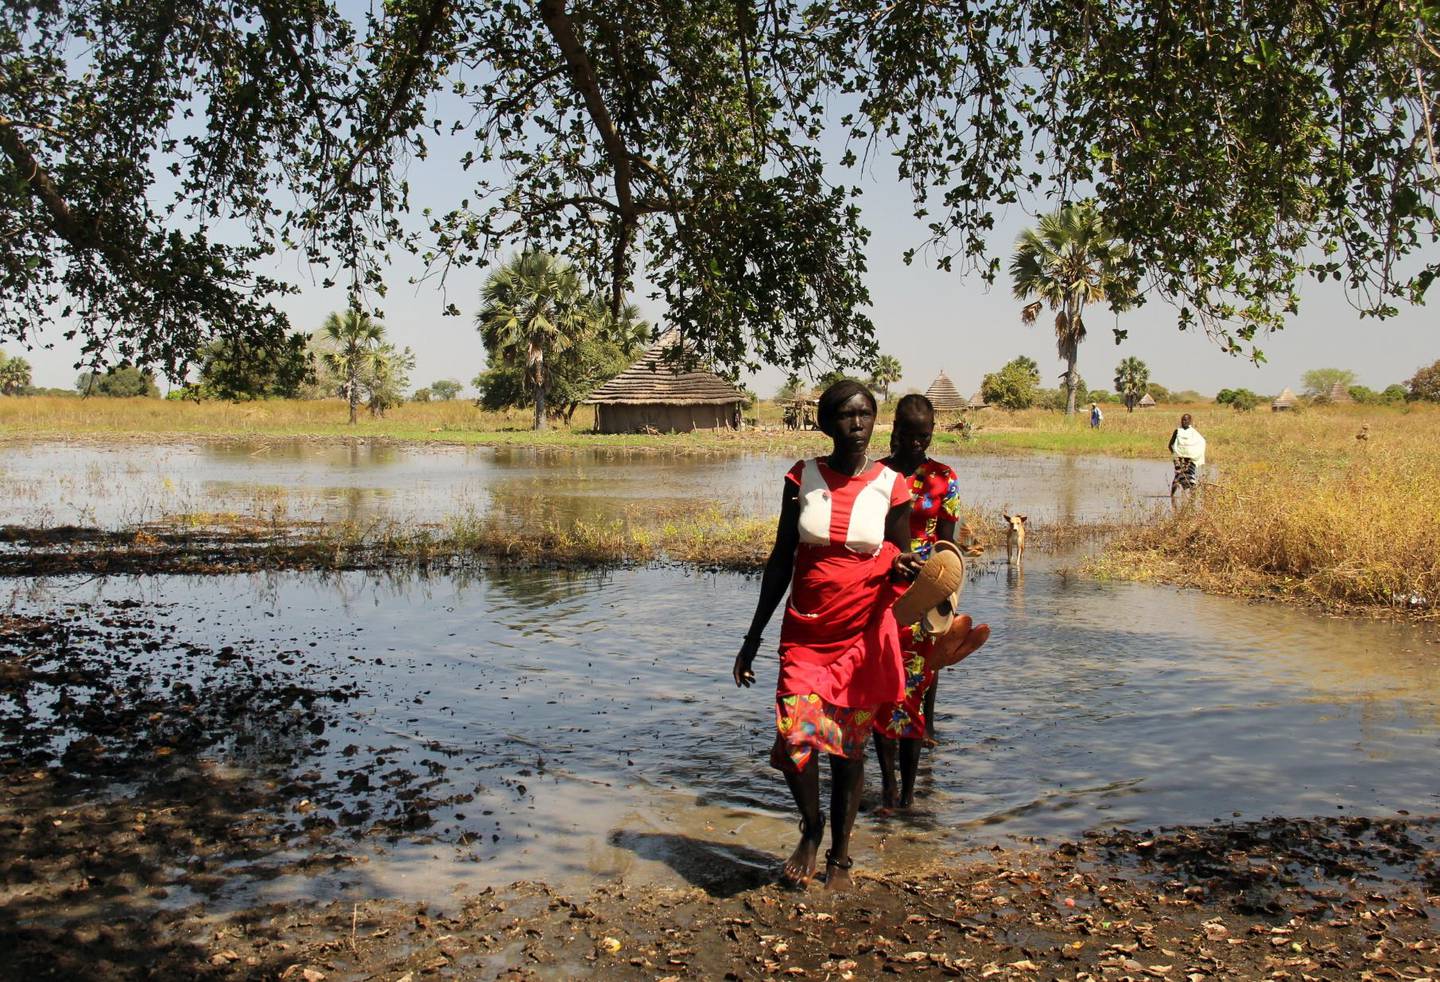 A displaced woman crosses a flooded area in Manager Ajak village, in South Sudan, November 27, 2020. Picture taken November 27, 2020. REUTERS/Denis Dumo